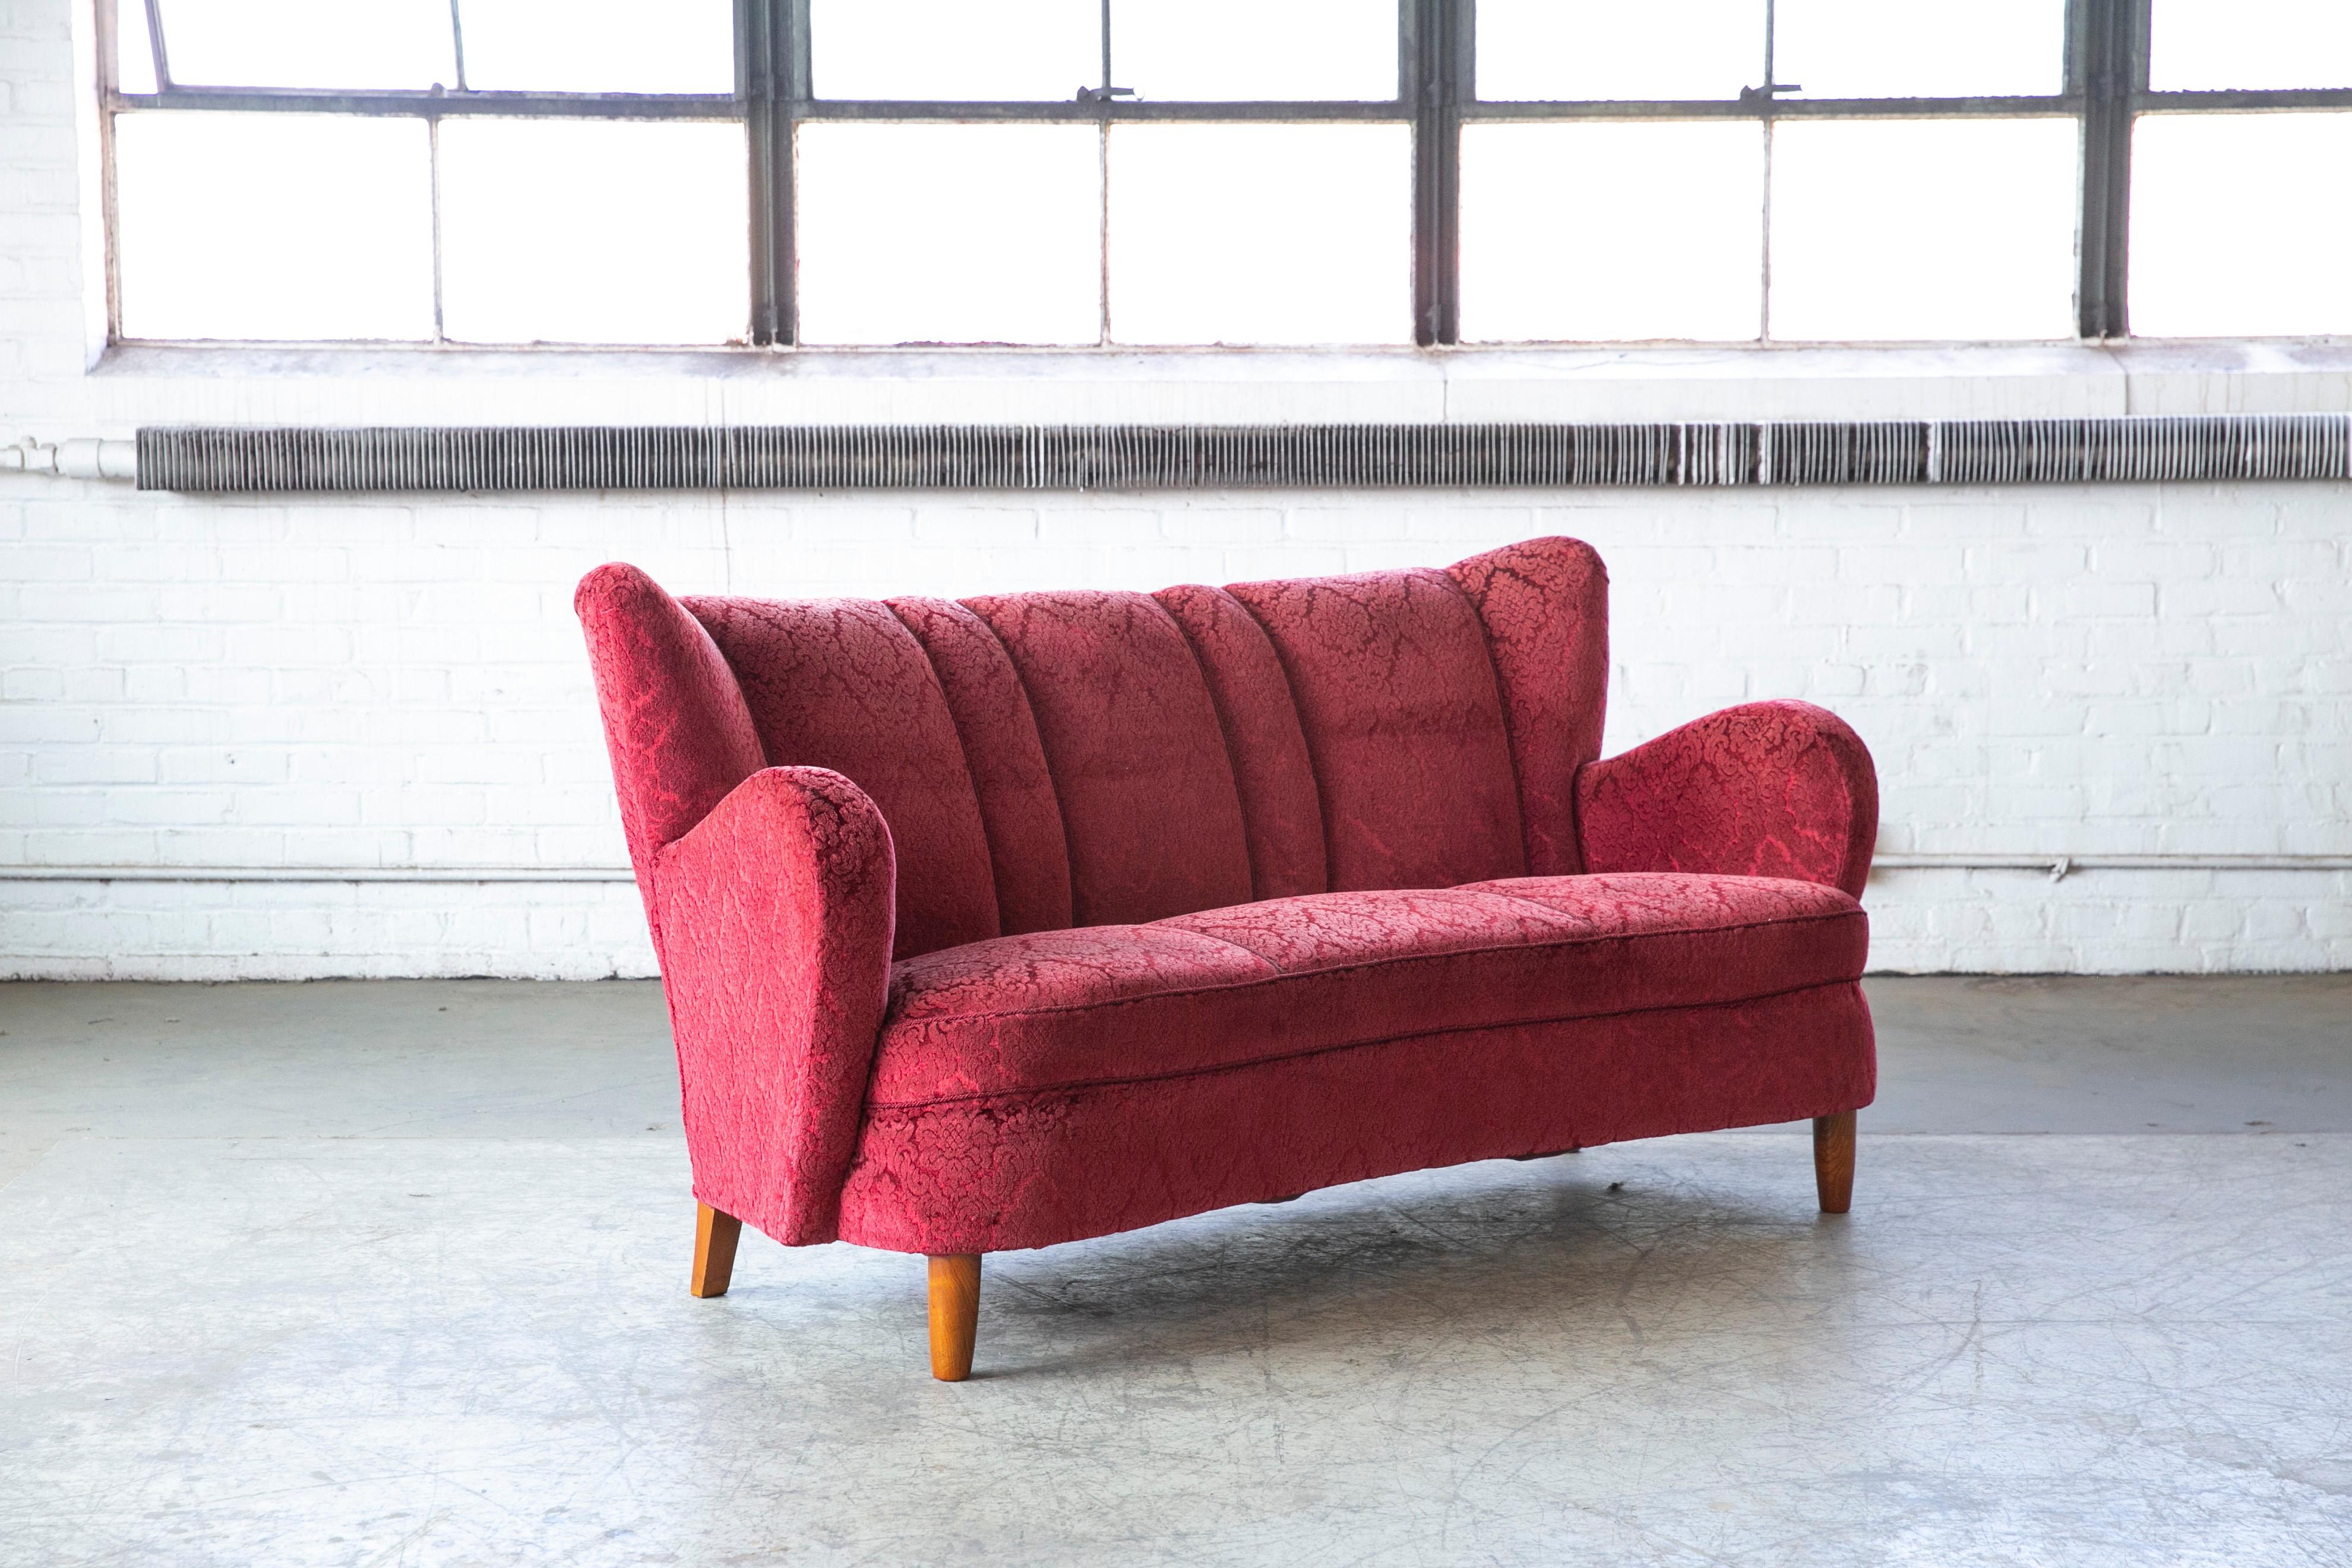 Mid-20th Century Danish 1940s Curved Sofa or Loveseat in Red Mohair For Sale